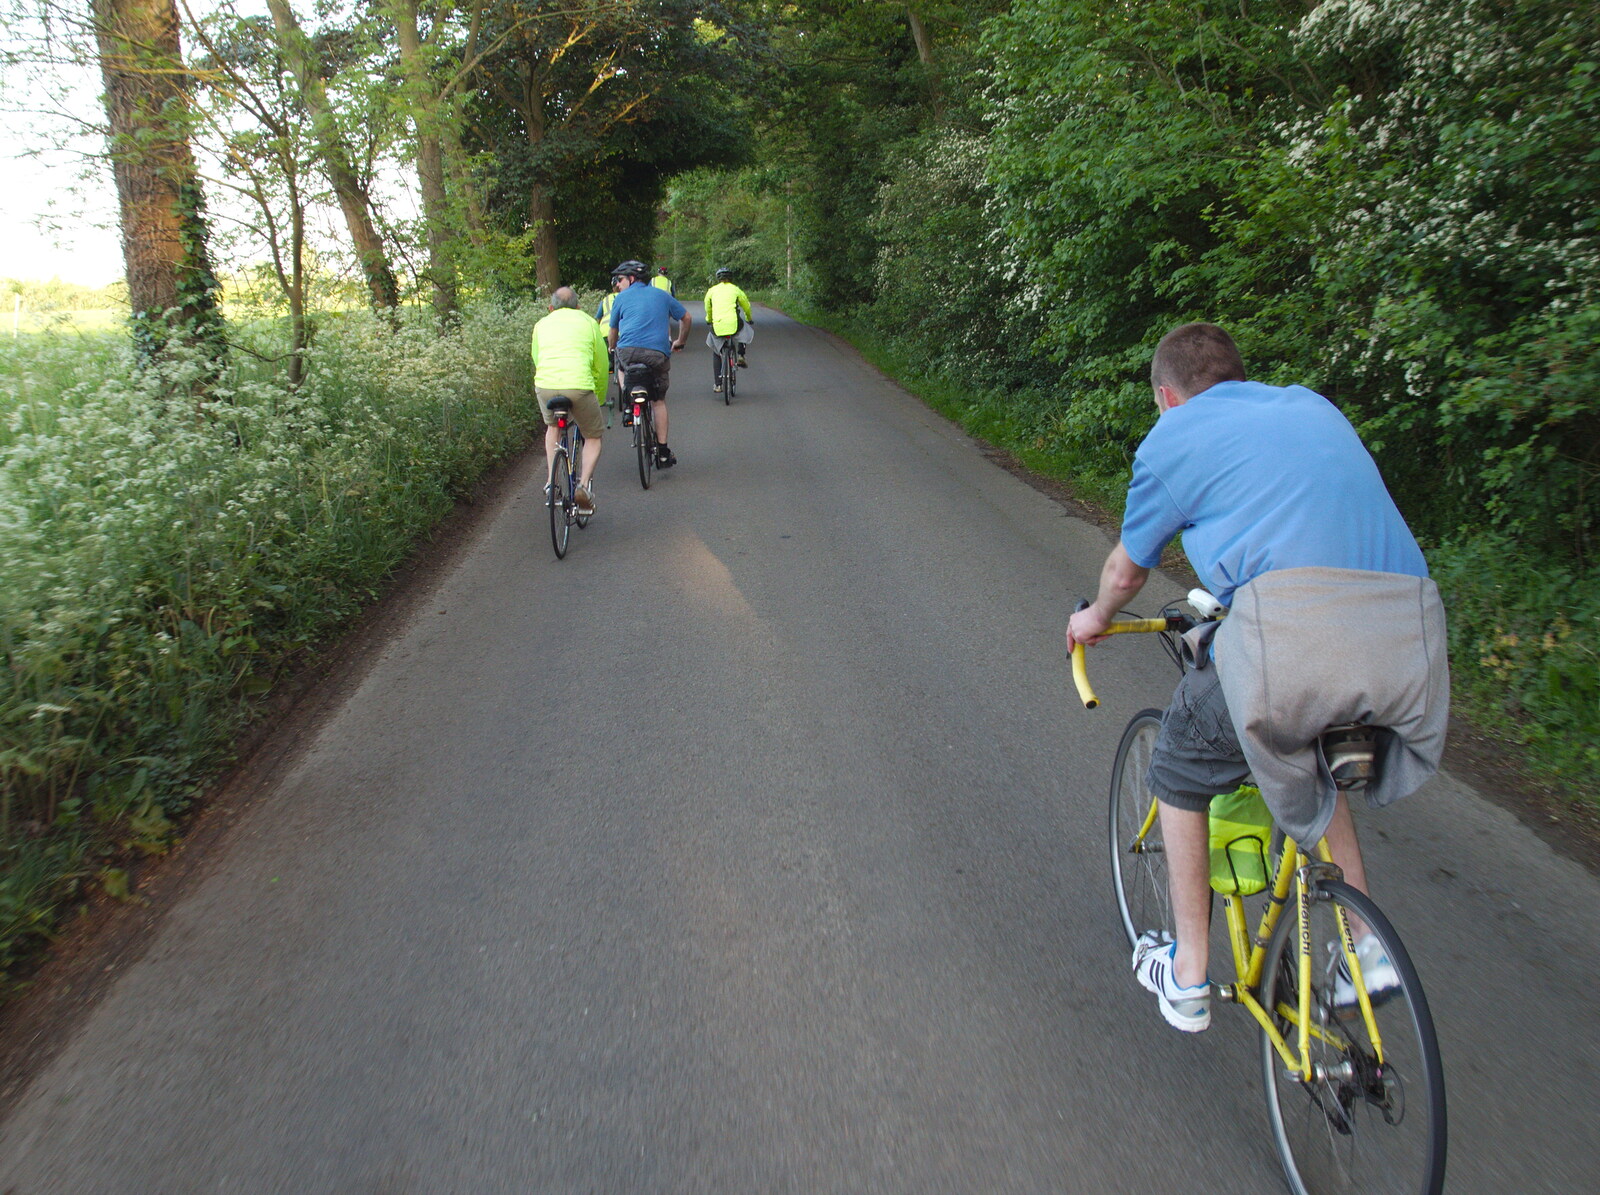 On the road to Worlingworth from The BSCC at The Crown, Bedfield, Suffolk - 15th May 2014